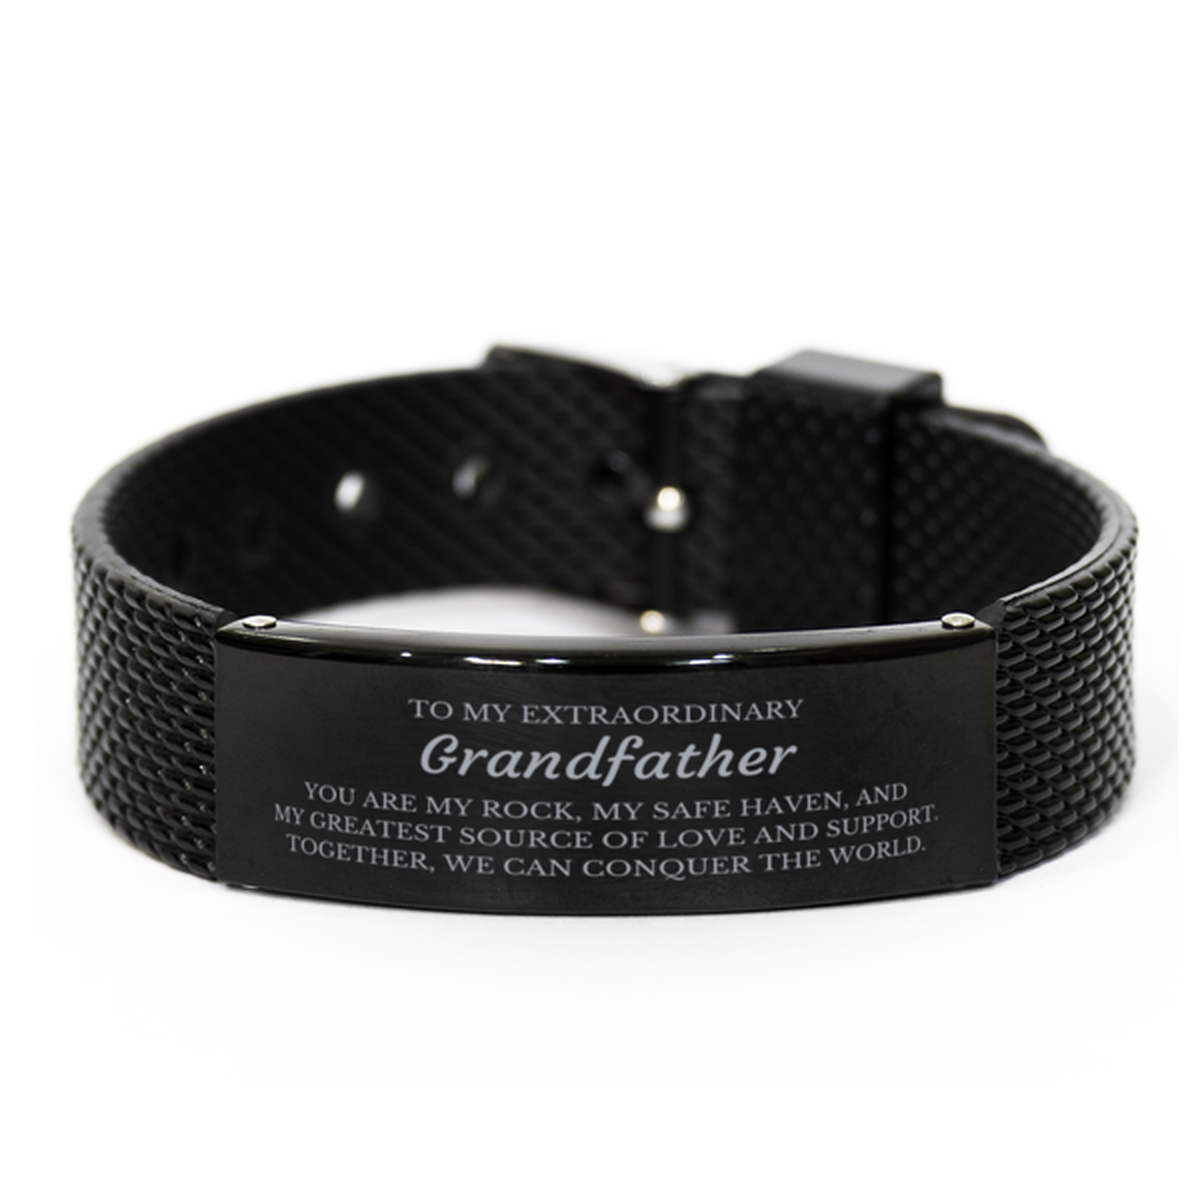 To My Extraordinary Grandfather Gifts, Together, we can conquer the world, Birthday Black Shark Mesh Bracelet For Grandfather, Christmas Gifts For Grandfather